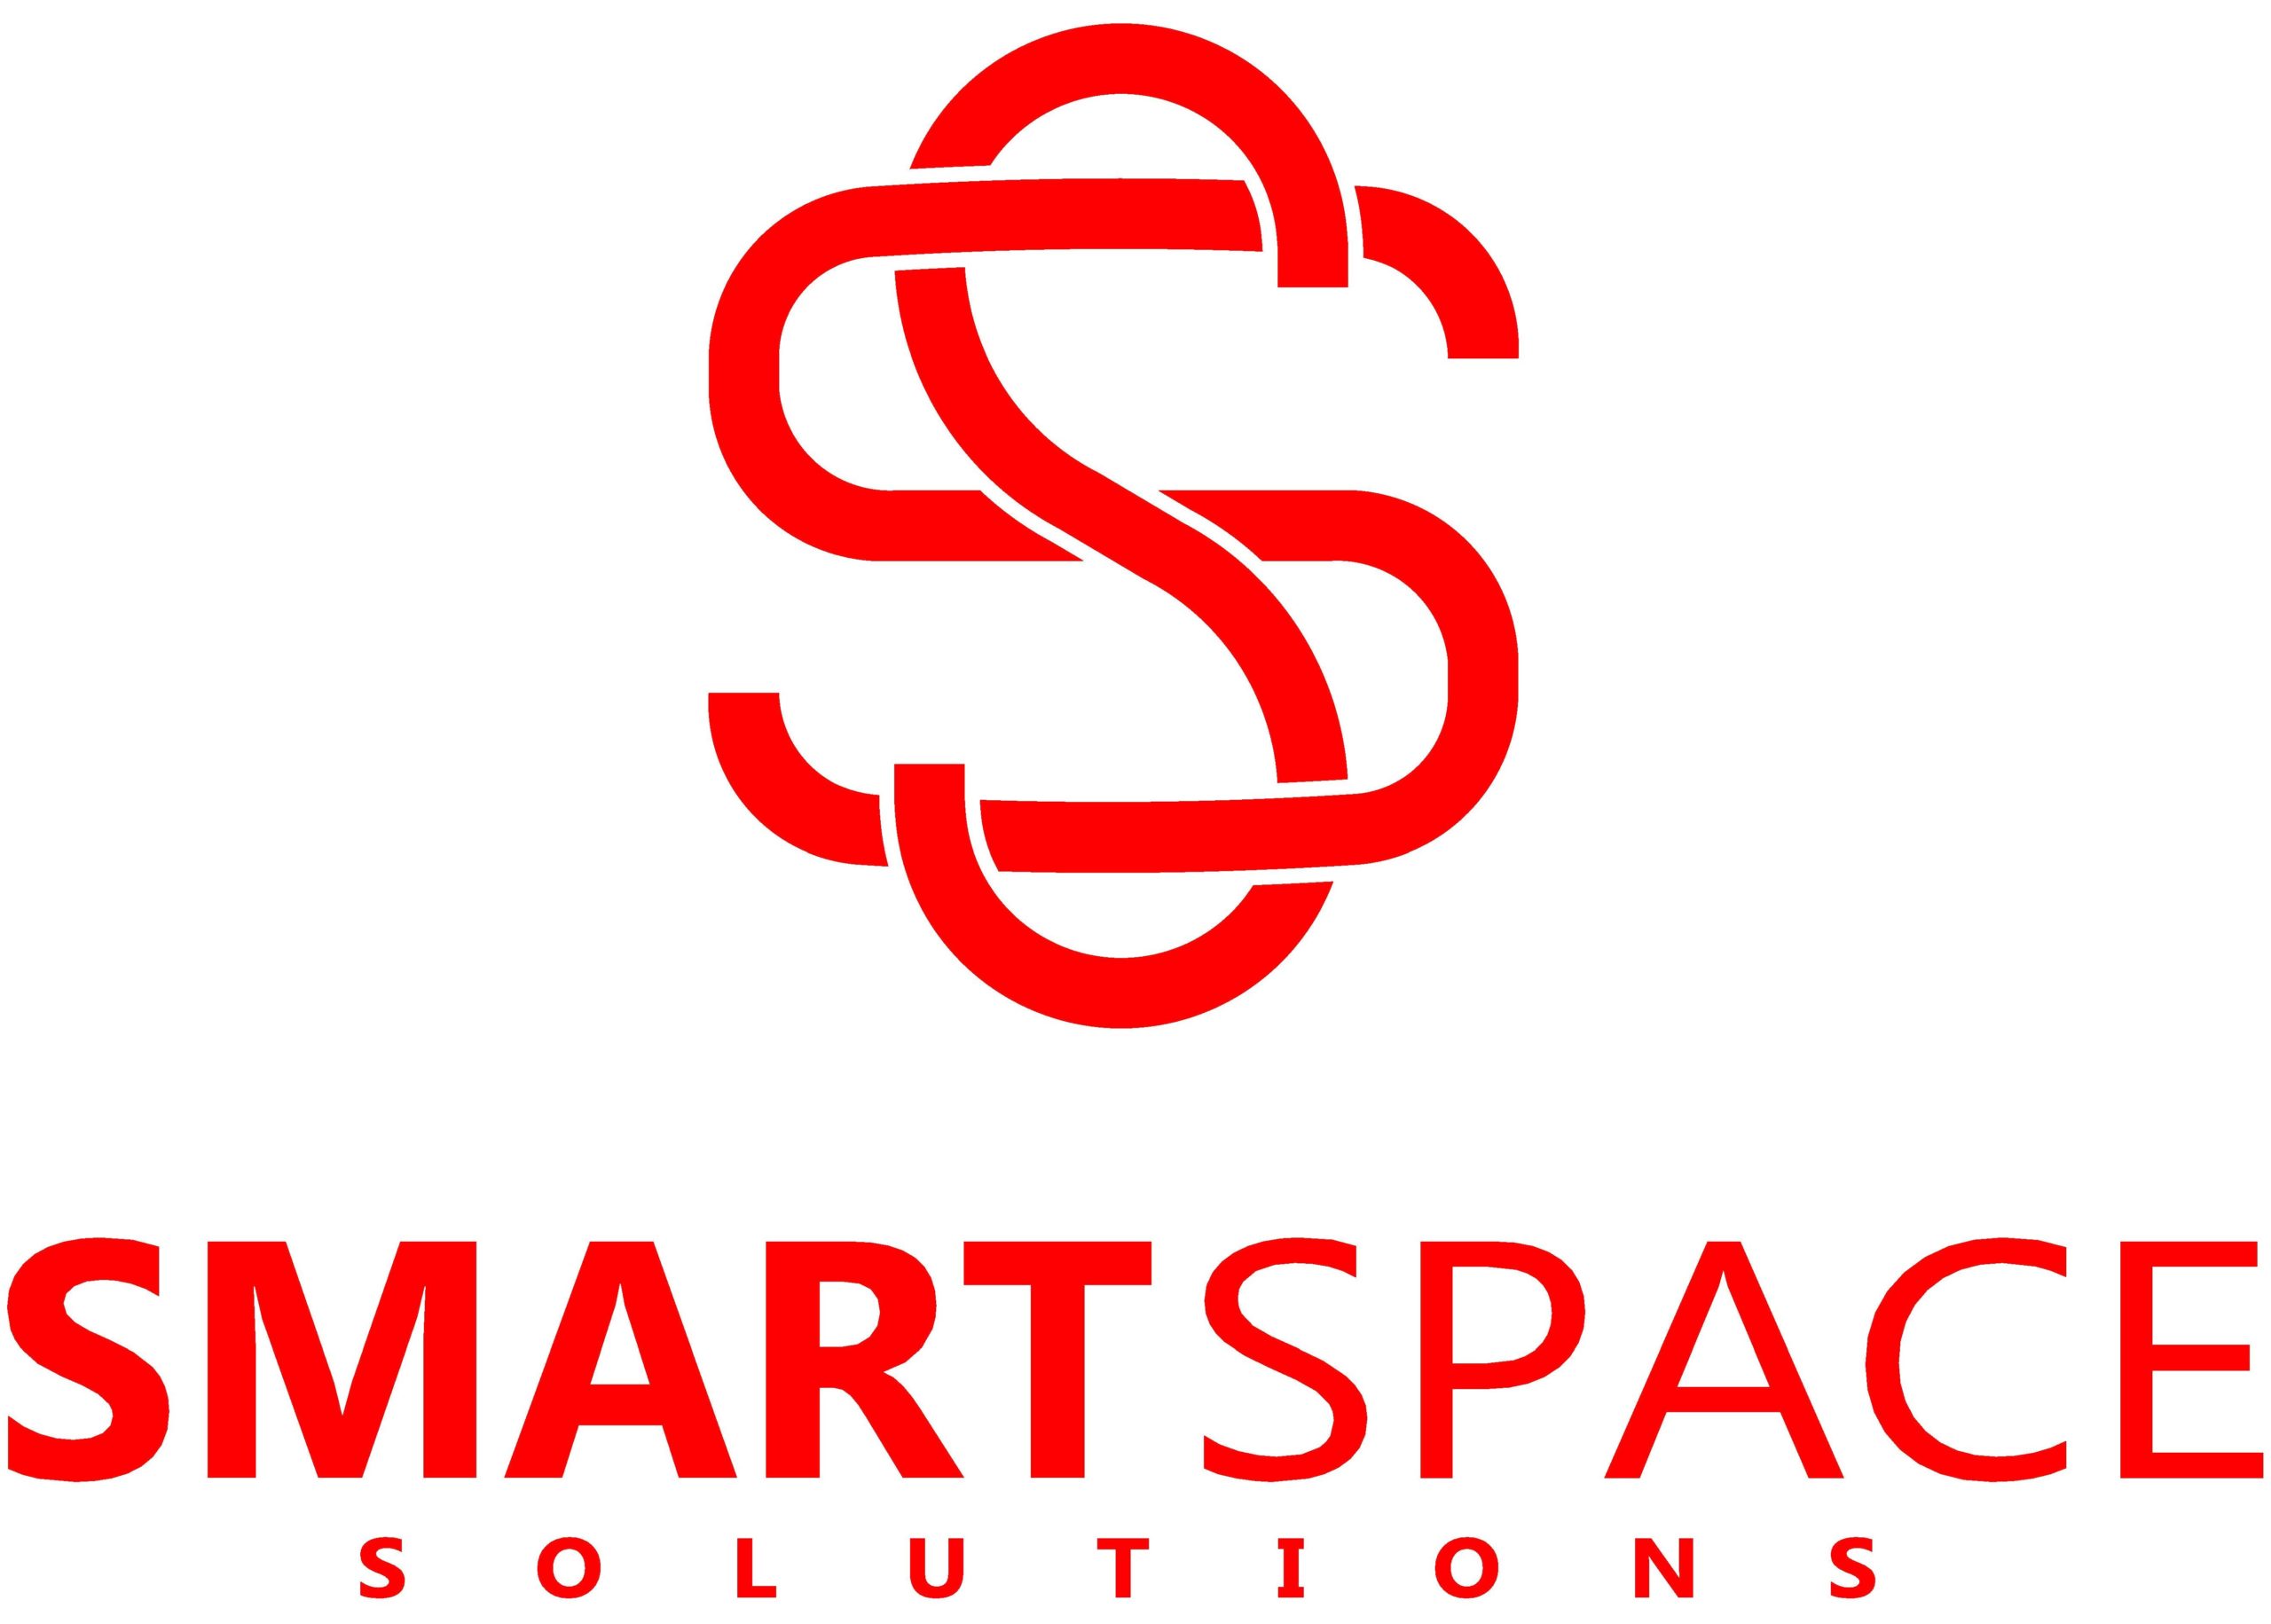 SMARTSPACE Solutions